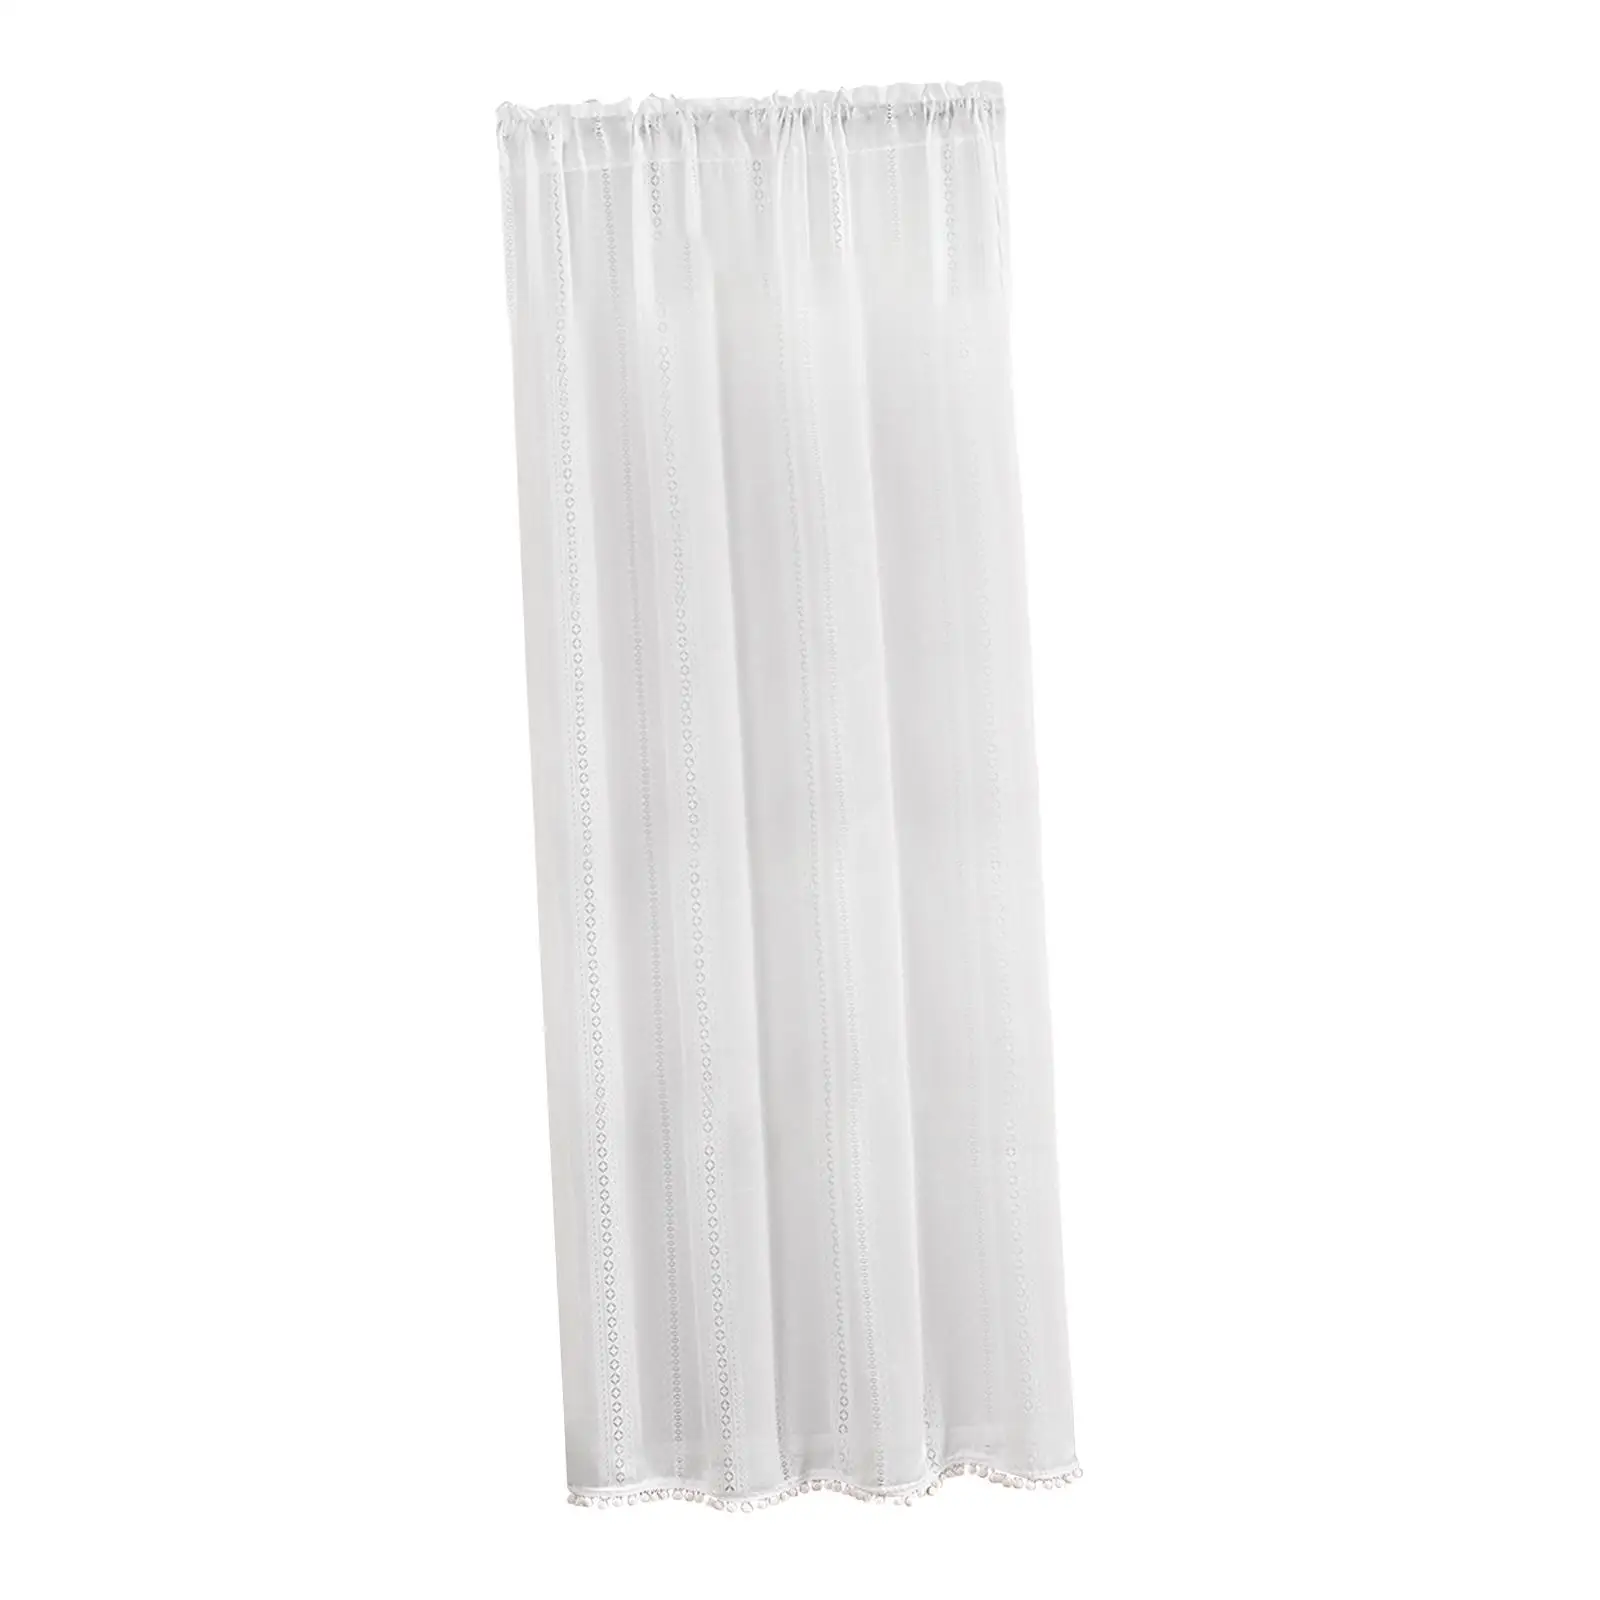 Elegant Sheer Voile Blinds Curtain White Tulle Curtains Window Tulle Curtains for Home Living Room Window Kitchen Decoration